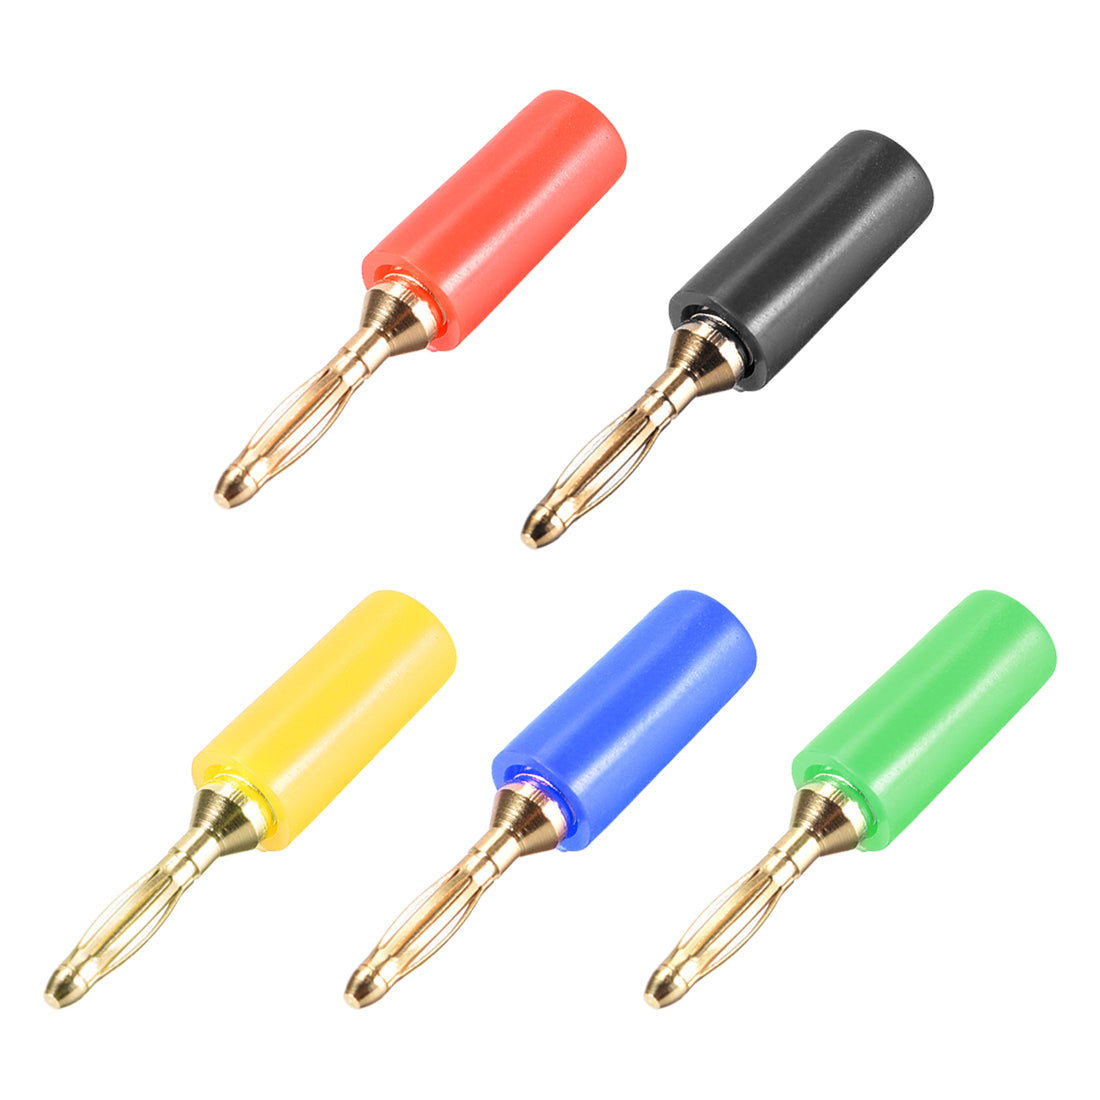 uxcell Uxcell 2mm Banana Speaker Wire Cable Plugs Connectors 5 Colors 5pcs Jack Connector